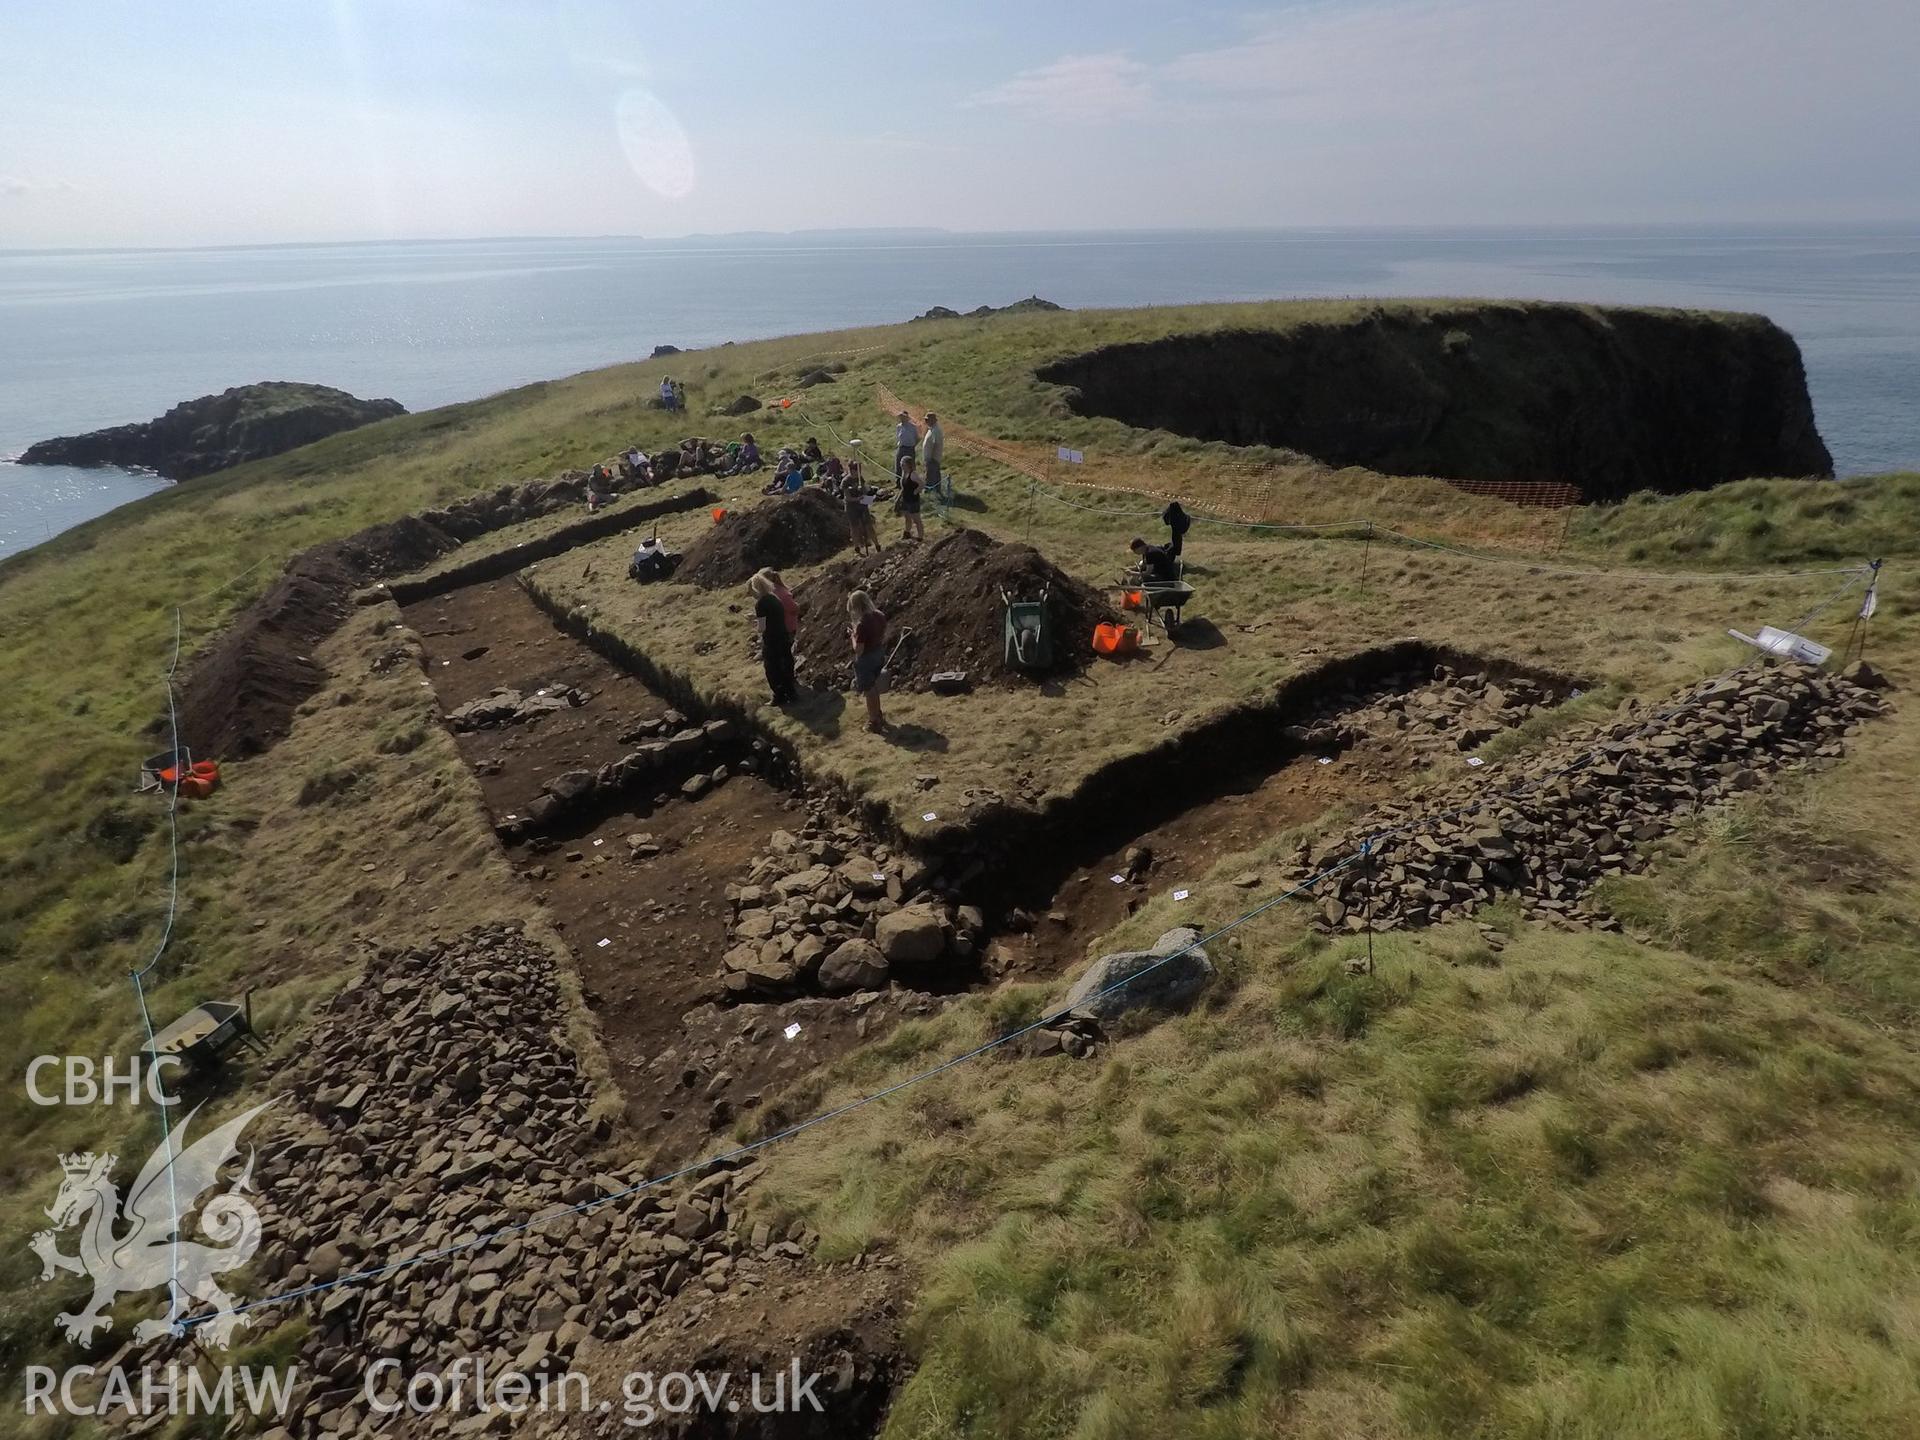 Excavations at Caerfai promontory fort with community members Taken by Louise Barker. Produced with EU funds through the Ireland Wales Co-operation Programme 2014-2023. All material made freely available through the Open Government Licence.